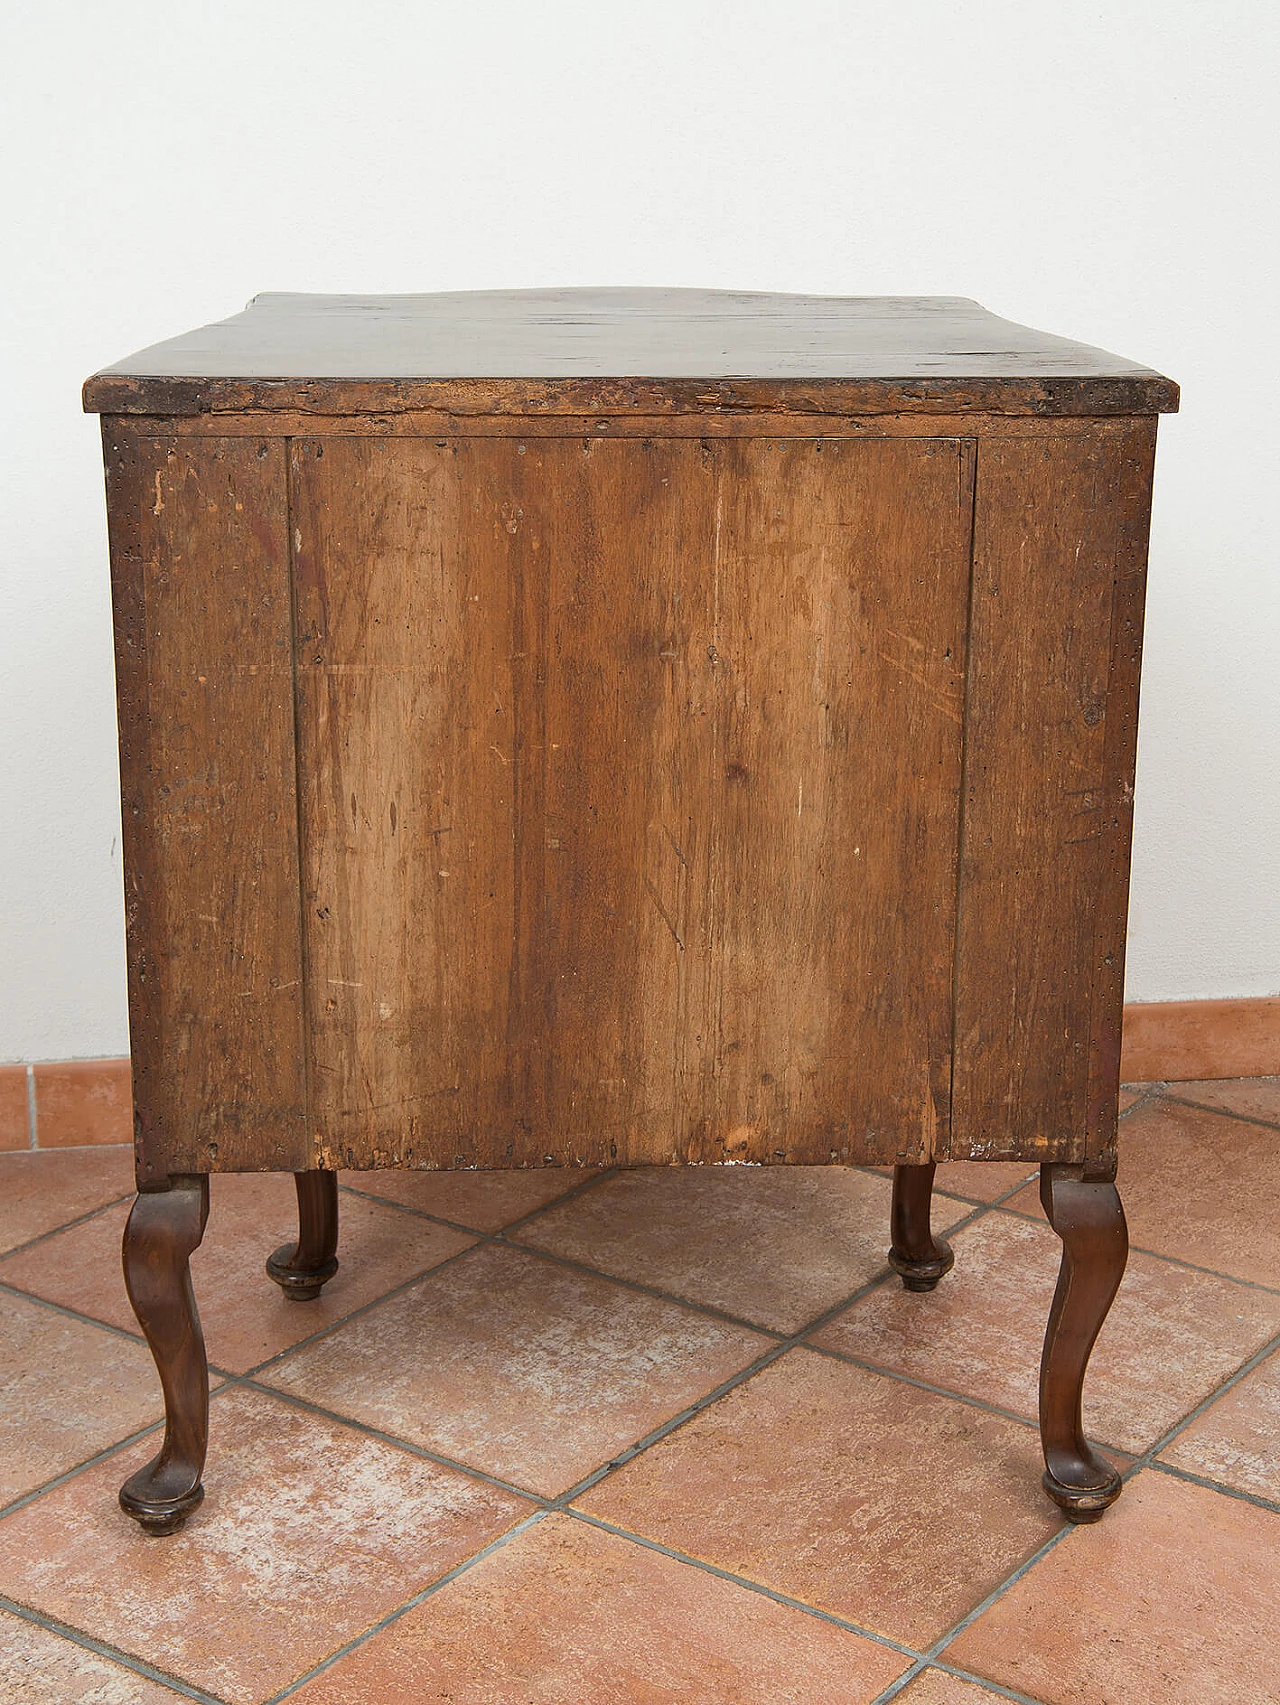 Neapolitan Louis XIV walnut-root bedside table with inlays, 18th century 4